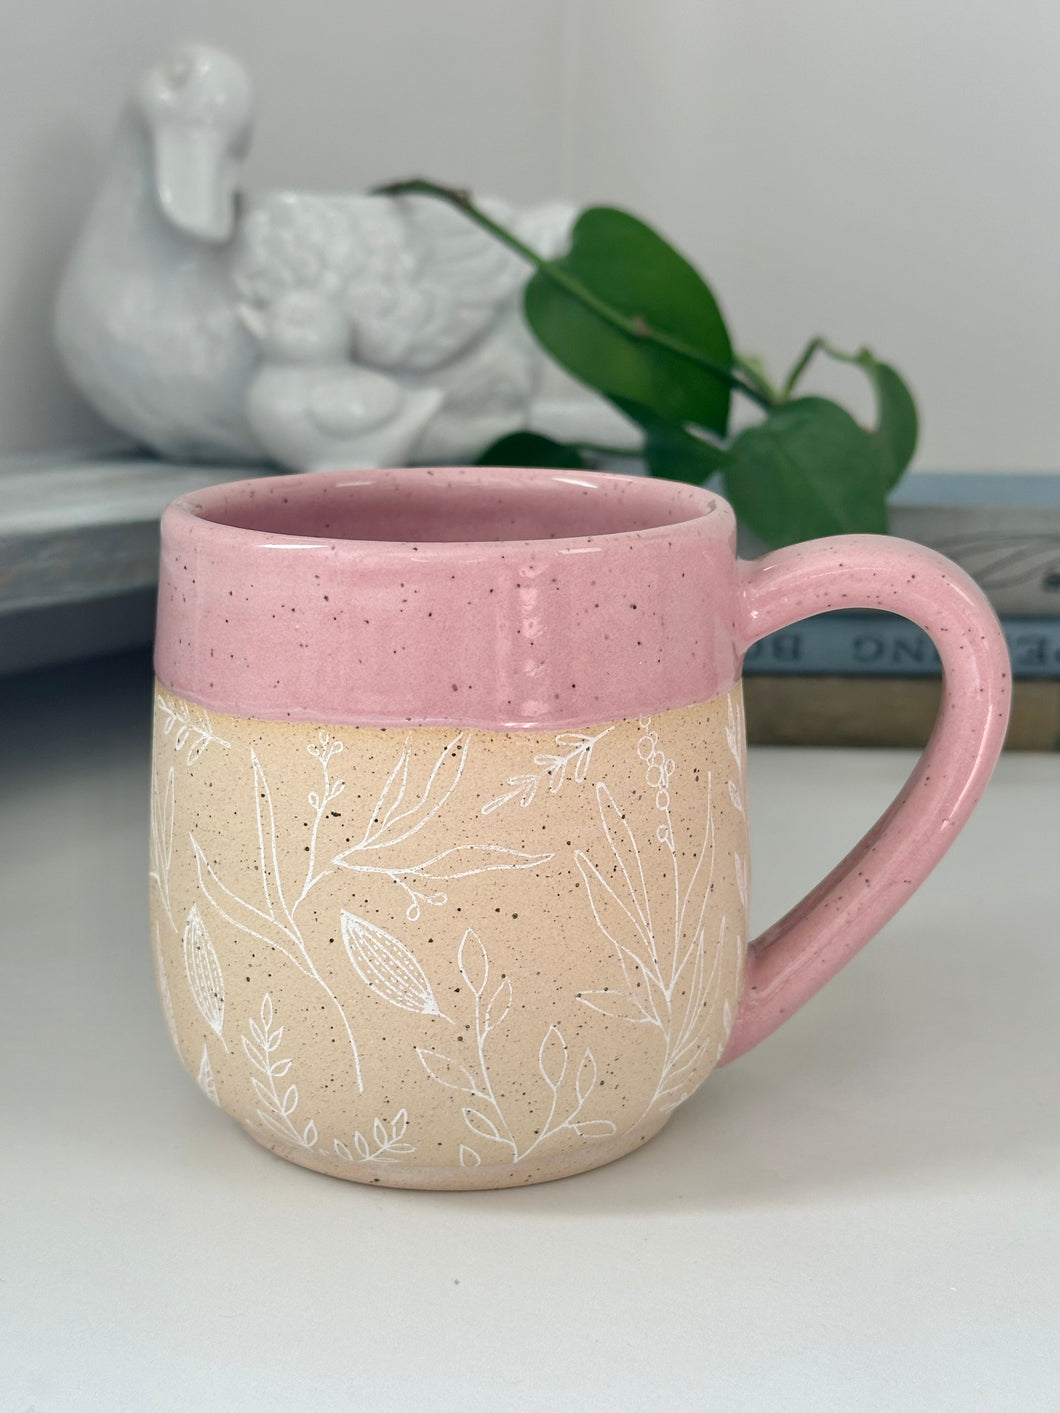 #013 - 20 oz. White floral pattern on bare clay, pink glazed rim and interior